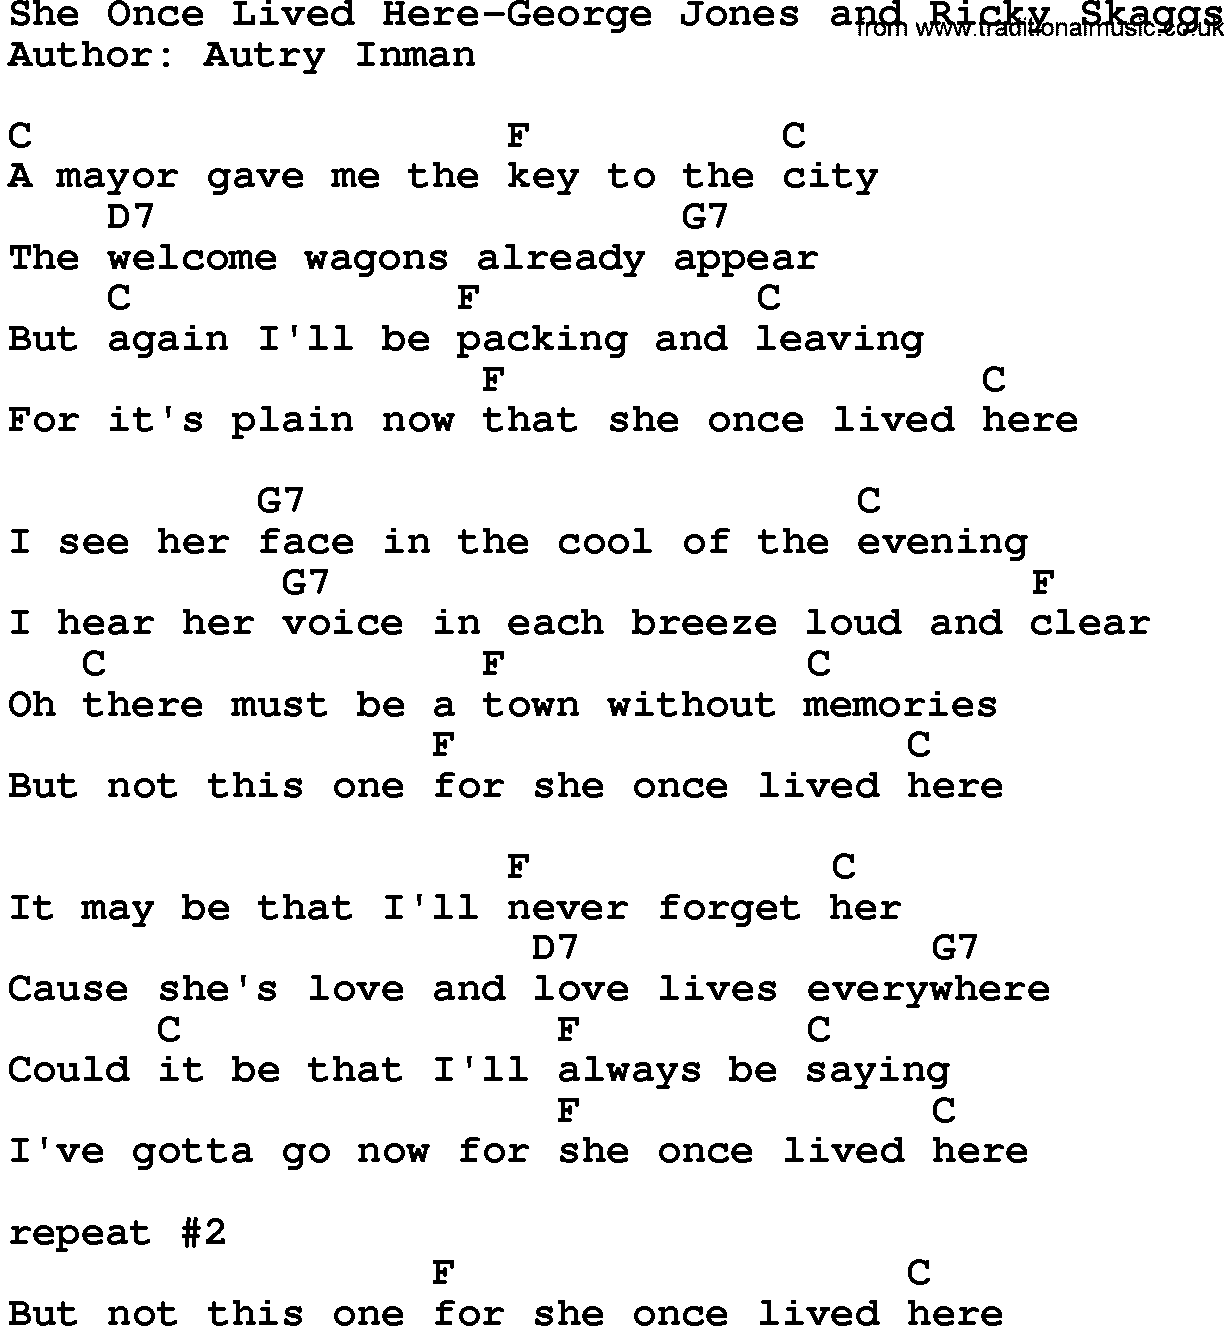 Country music song: She Once Lived Here-George Jones And Ricky Skaggs lyrics and chords